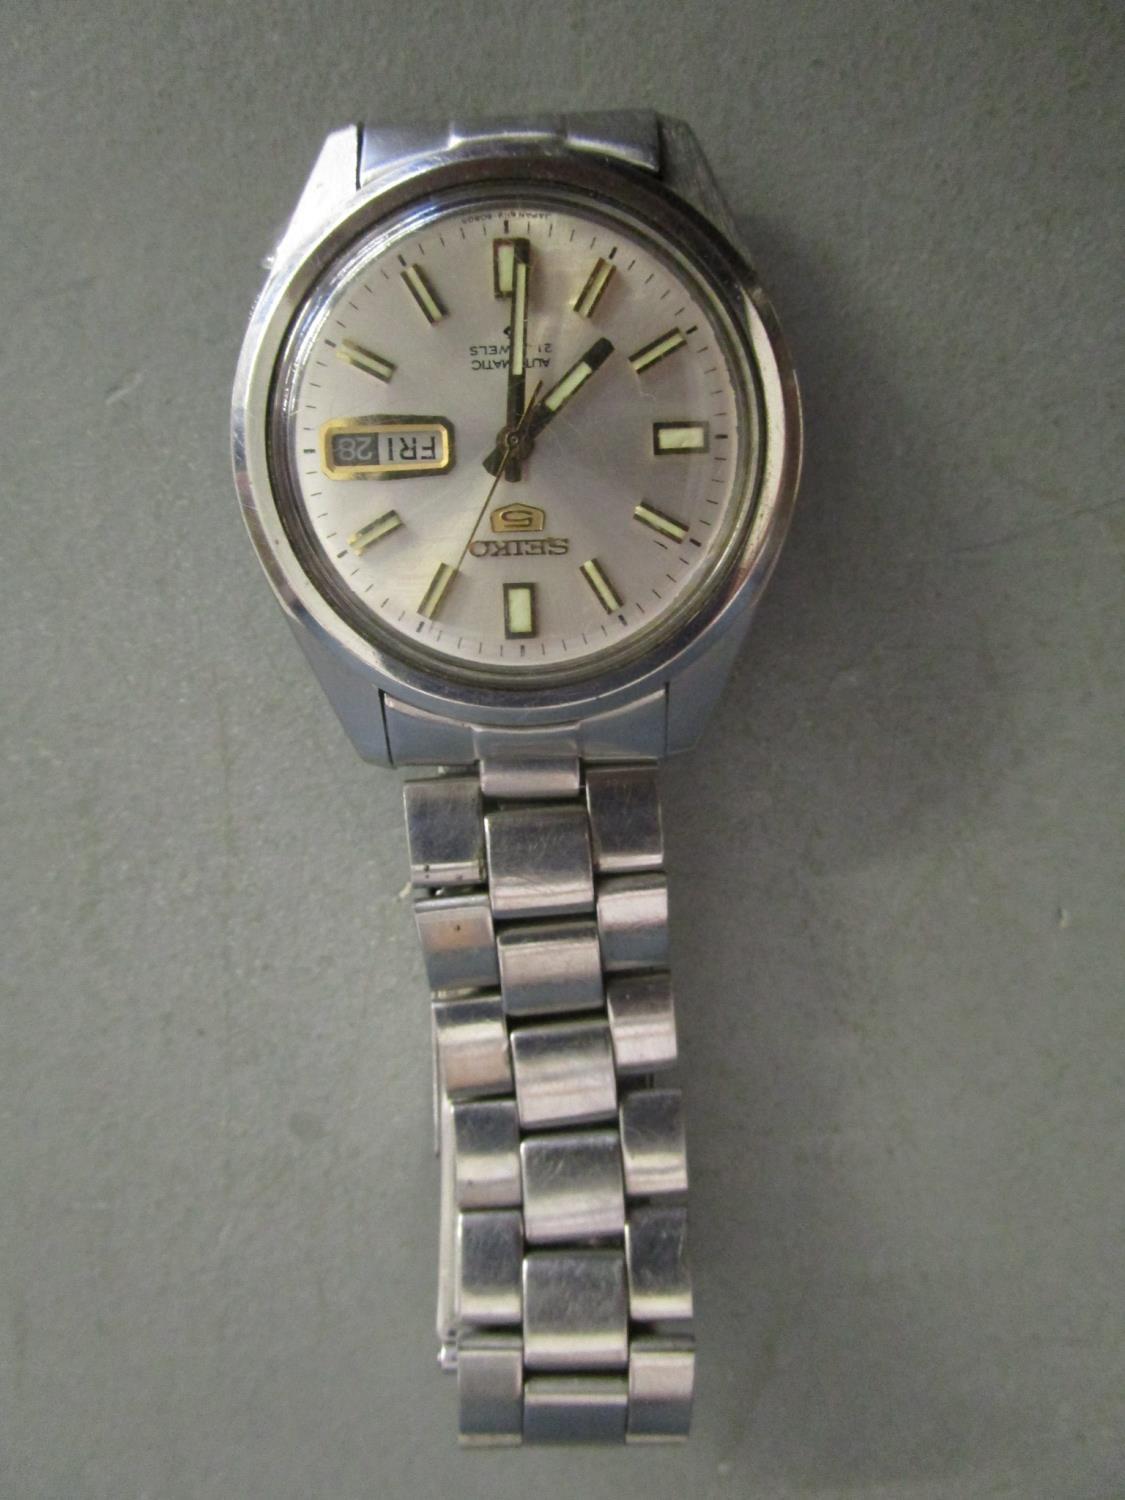 Seiko 5 automatic 21 jewel gents wristwatch with luminous bat markers and hands, date aperture at 3,